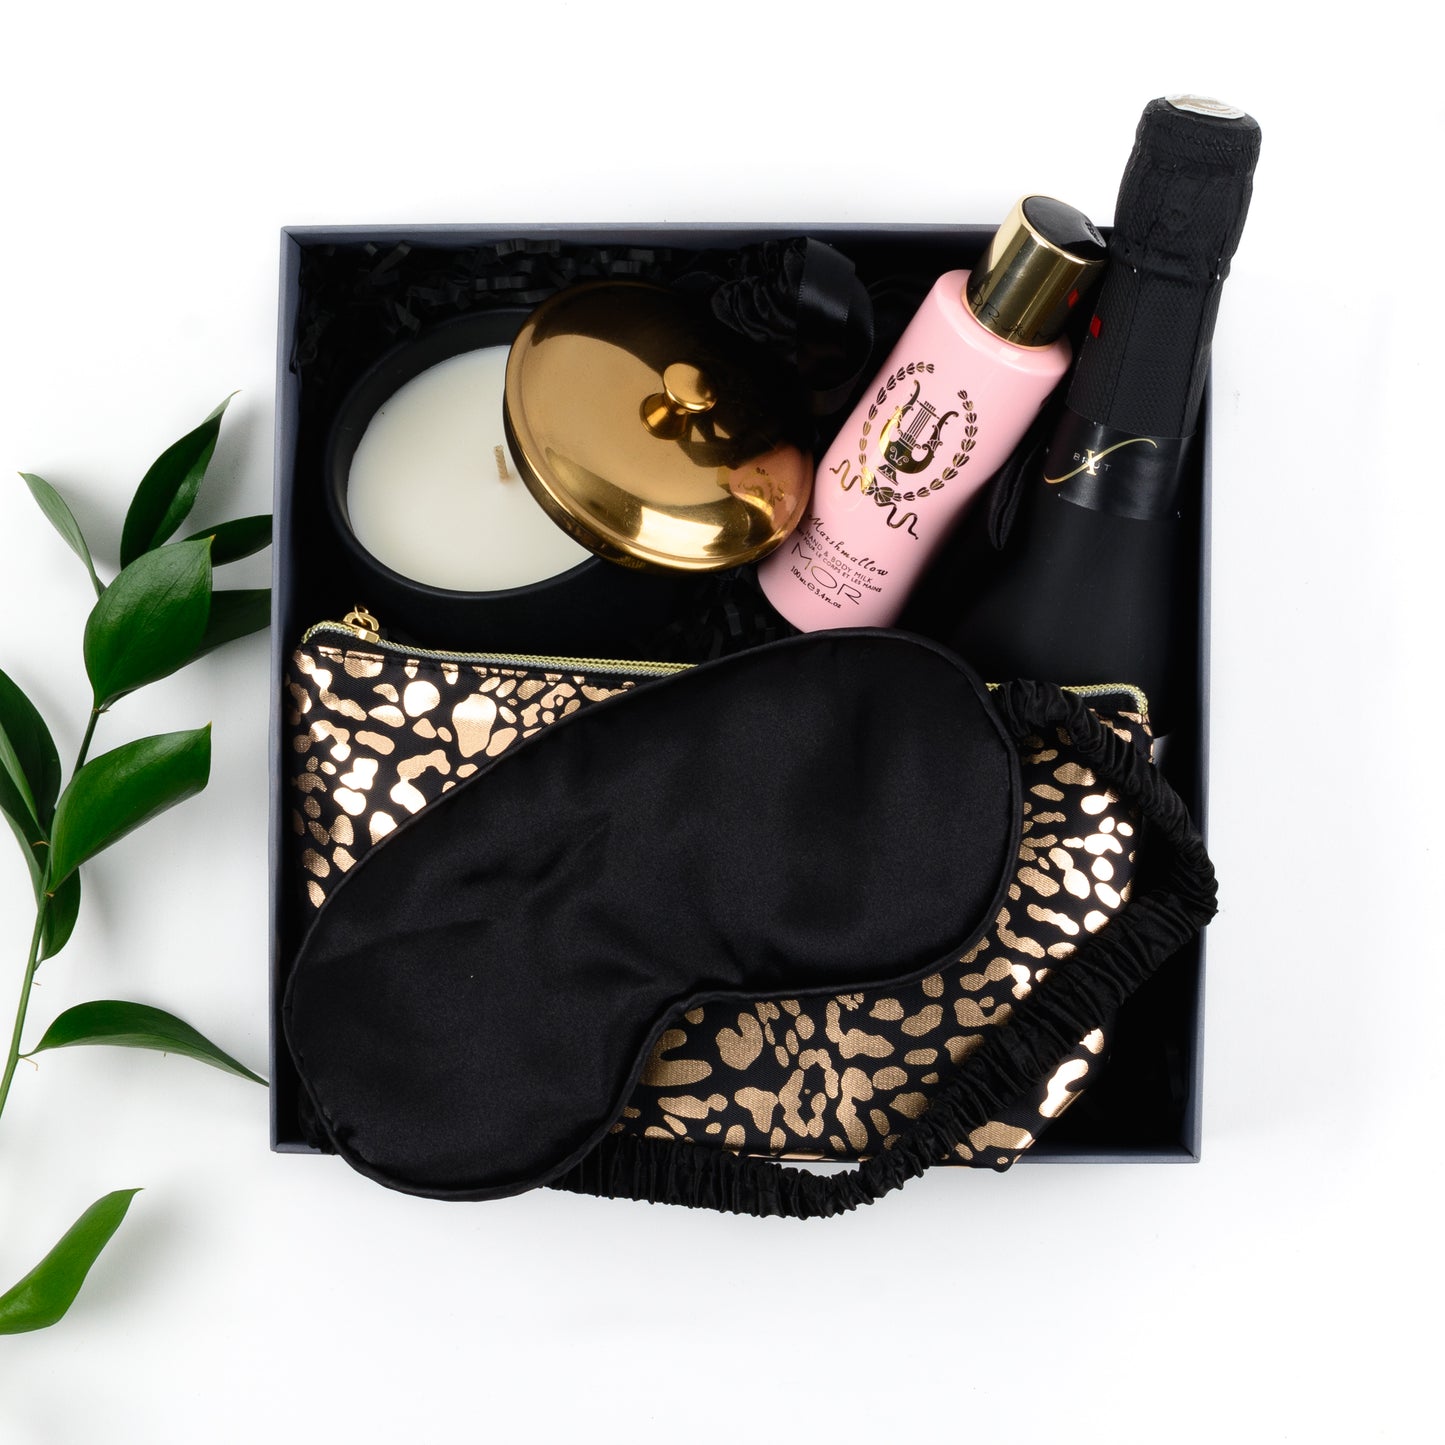 Gift box contains cosmetic purse, lotion, candle, eye mask, freixenet.